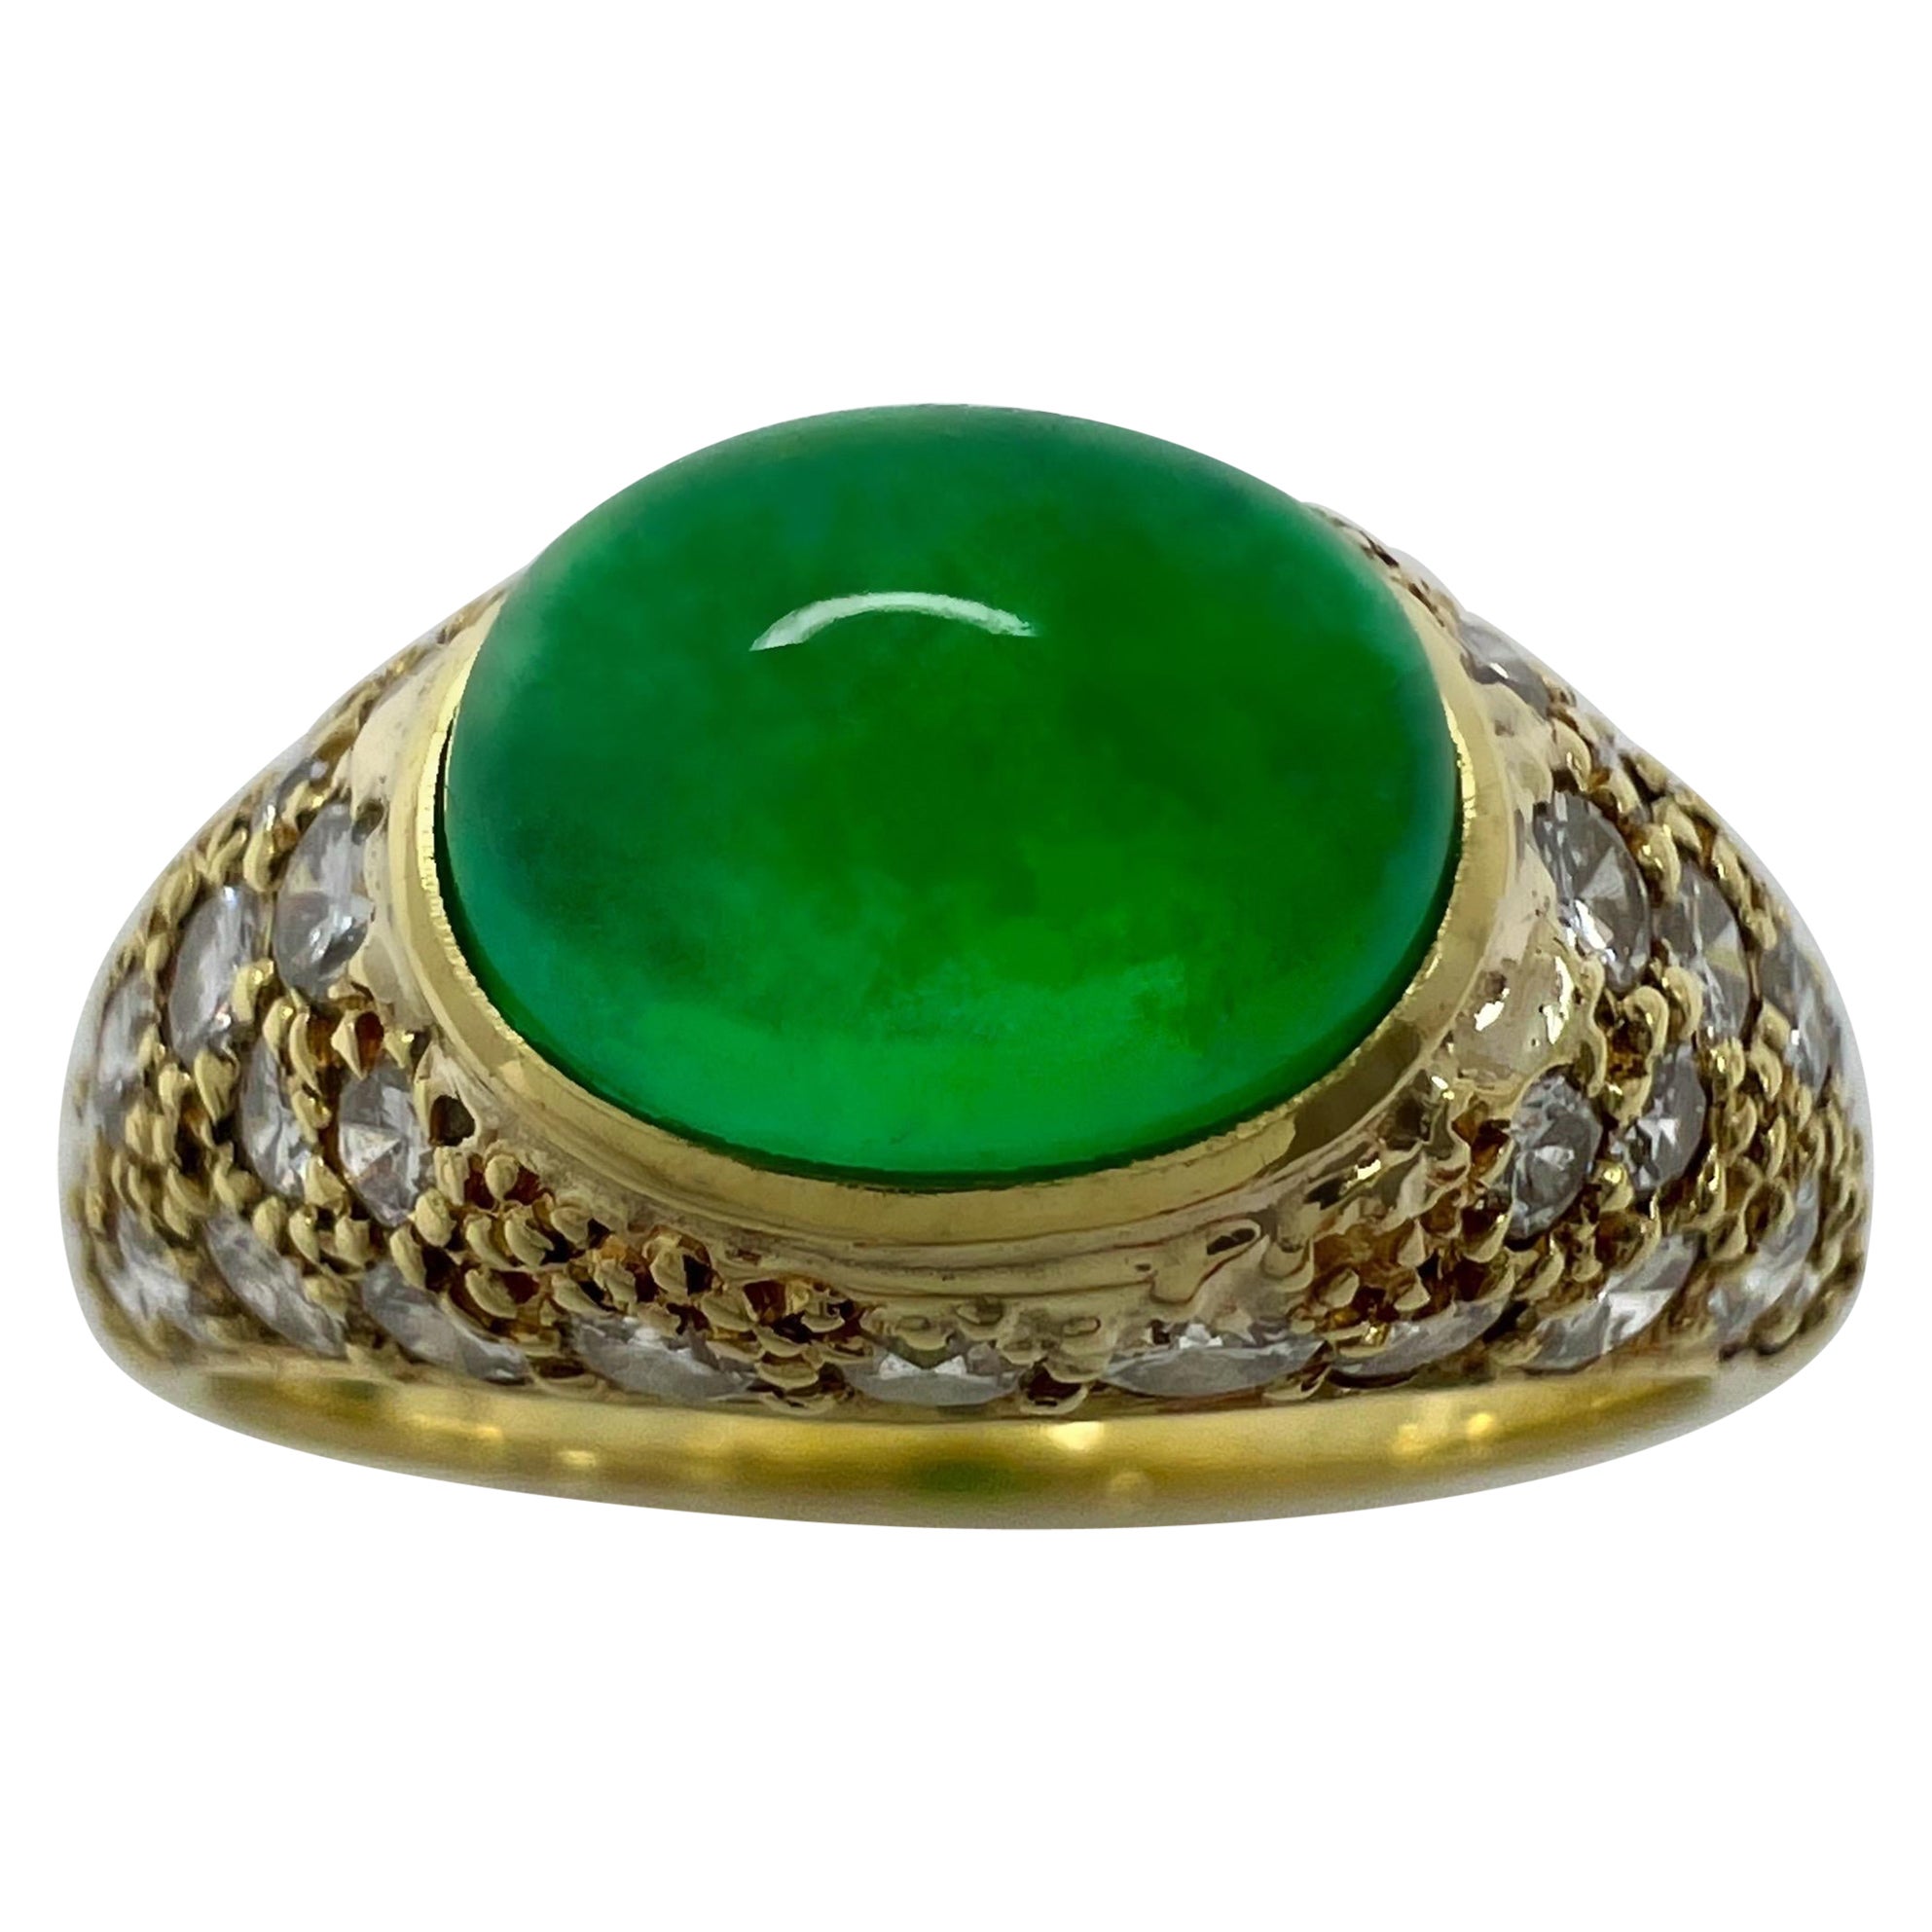 Rare Vintage Van Cleef & Arpels 2 Carat Emerald And Diamond Cocktail Dome Ring